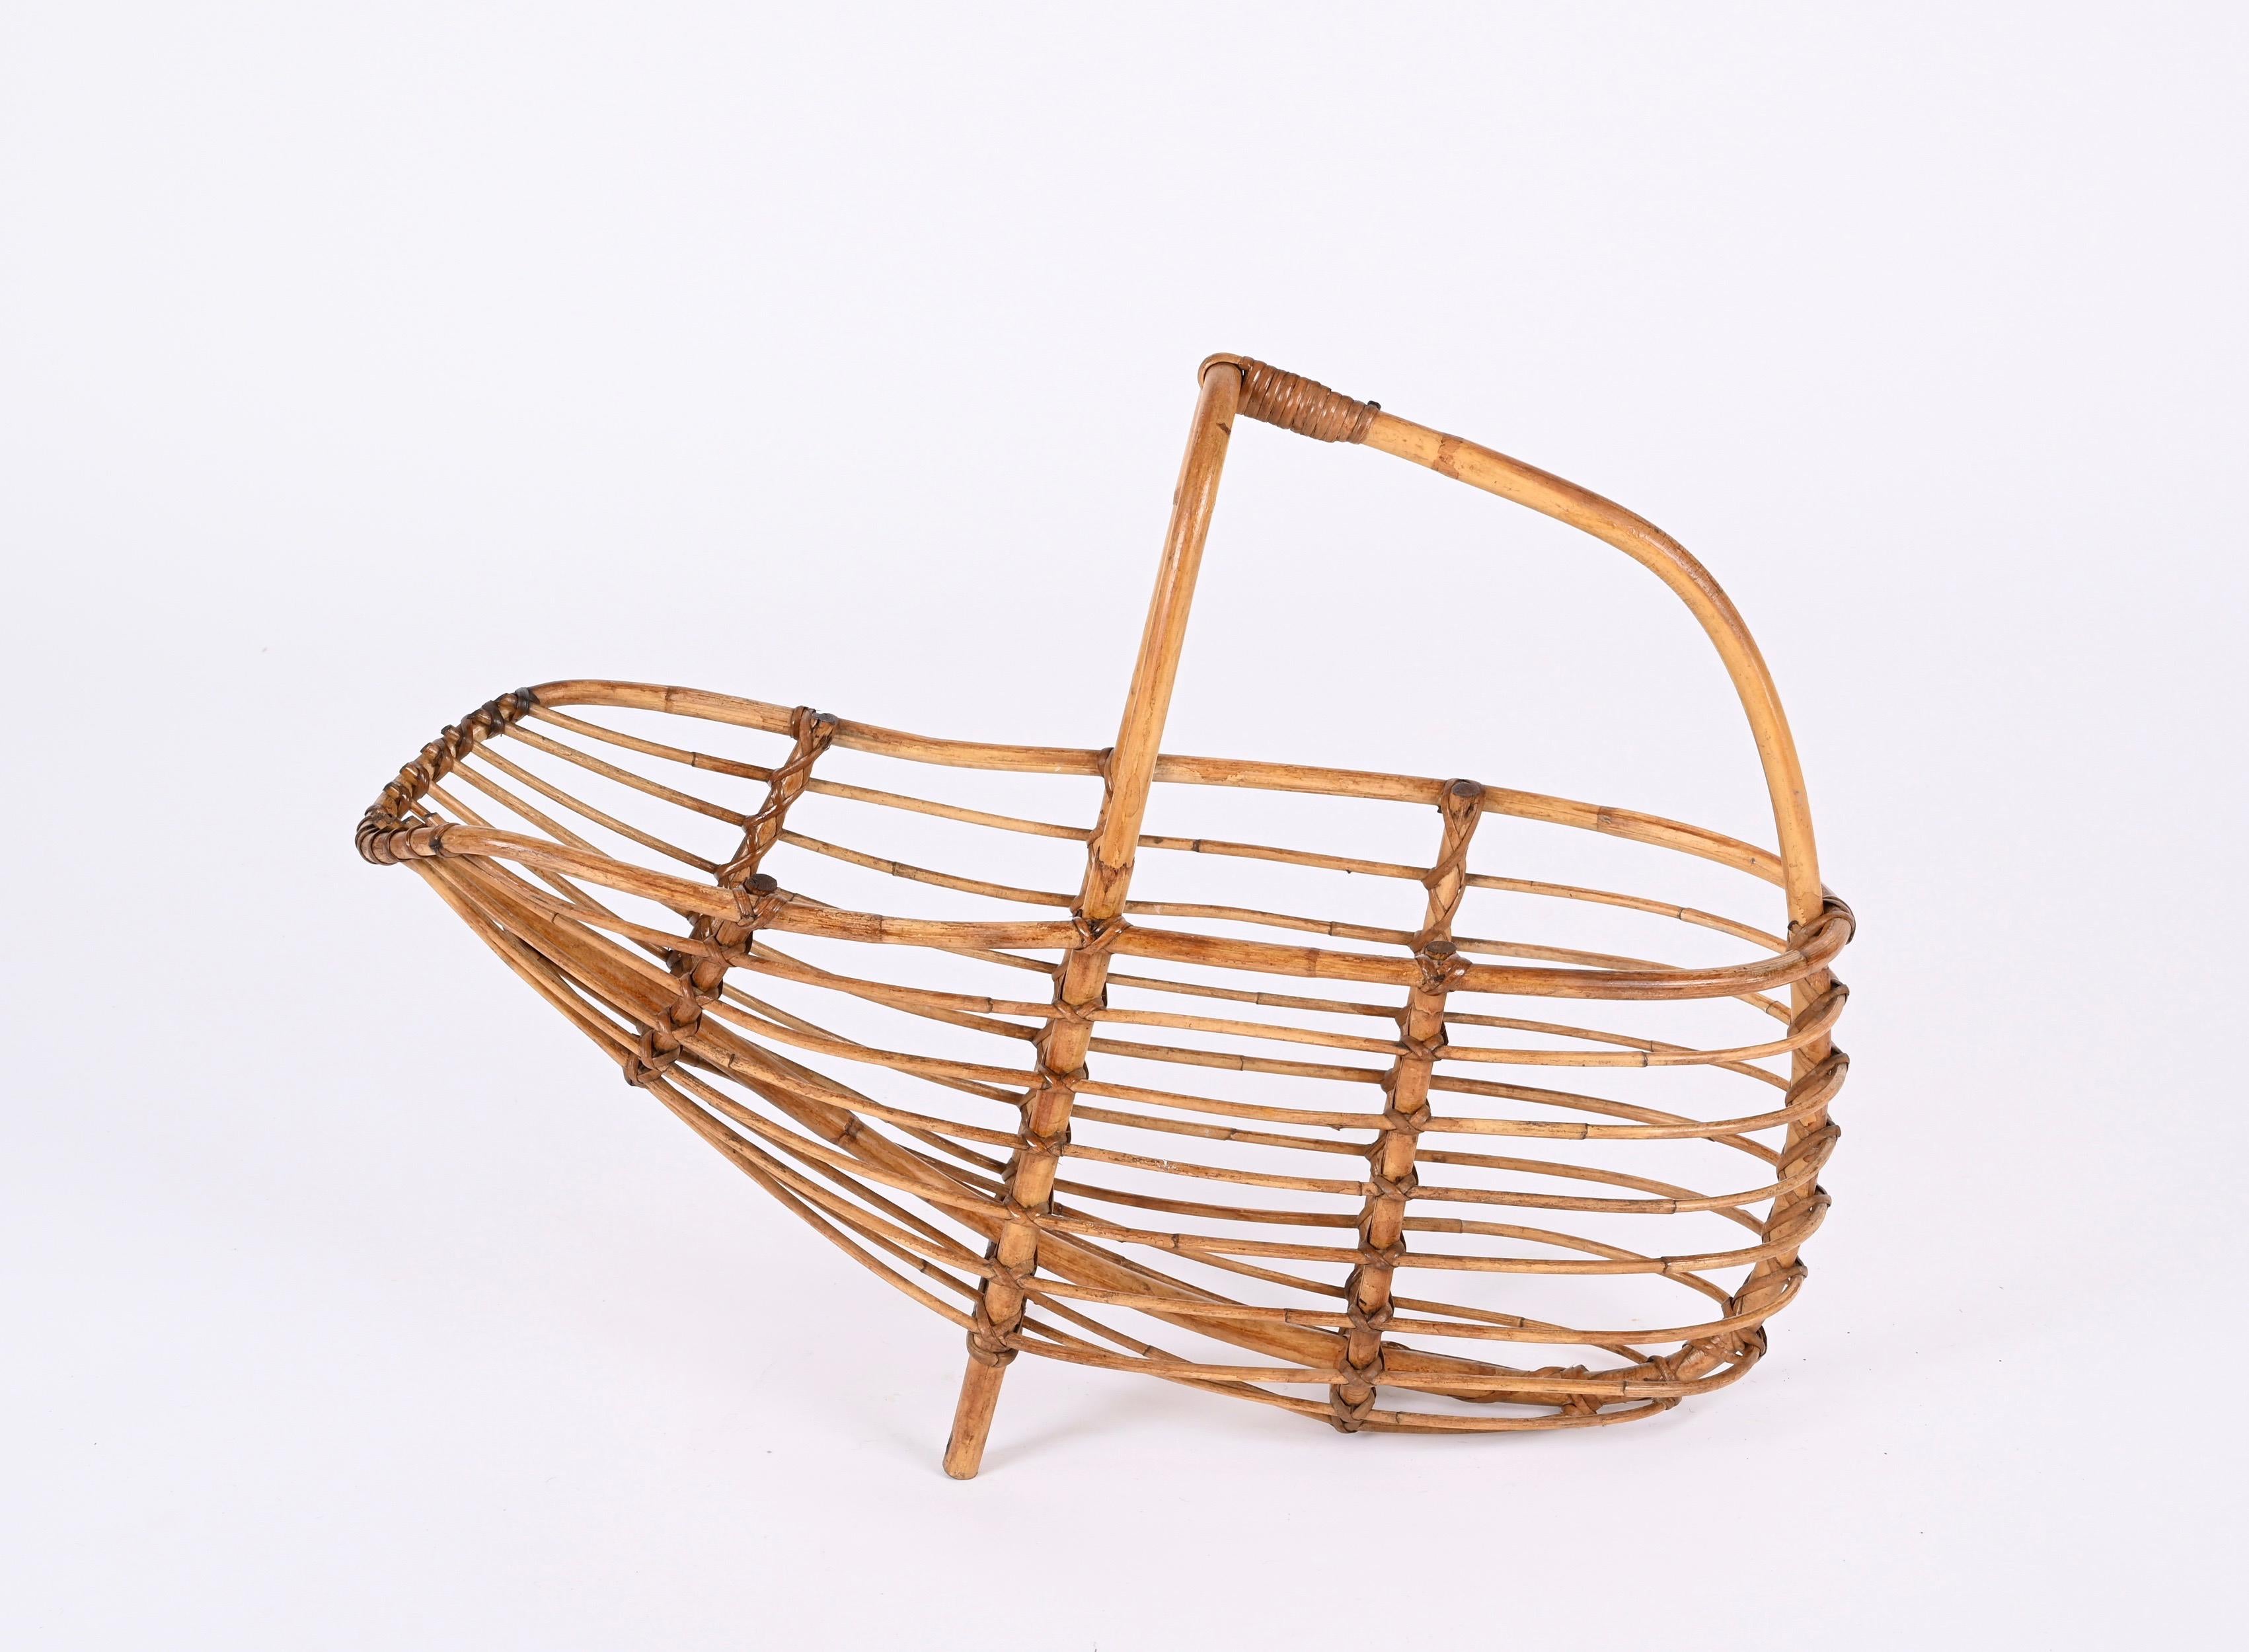 Midcentury French Riviera Bamboo and Rattan Italian Magazine Rack, 1960s For Sale 11